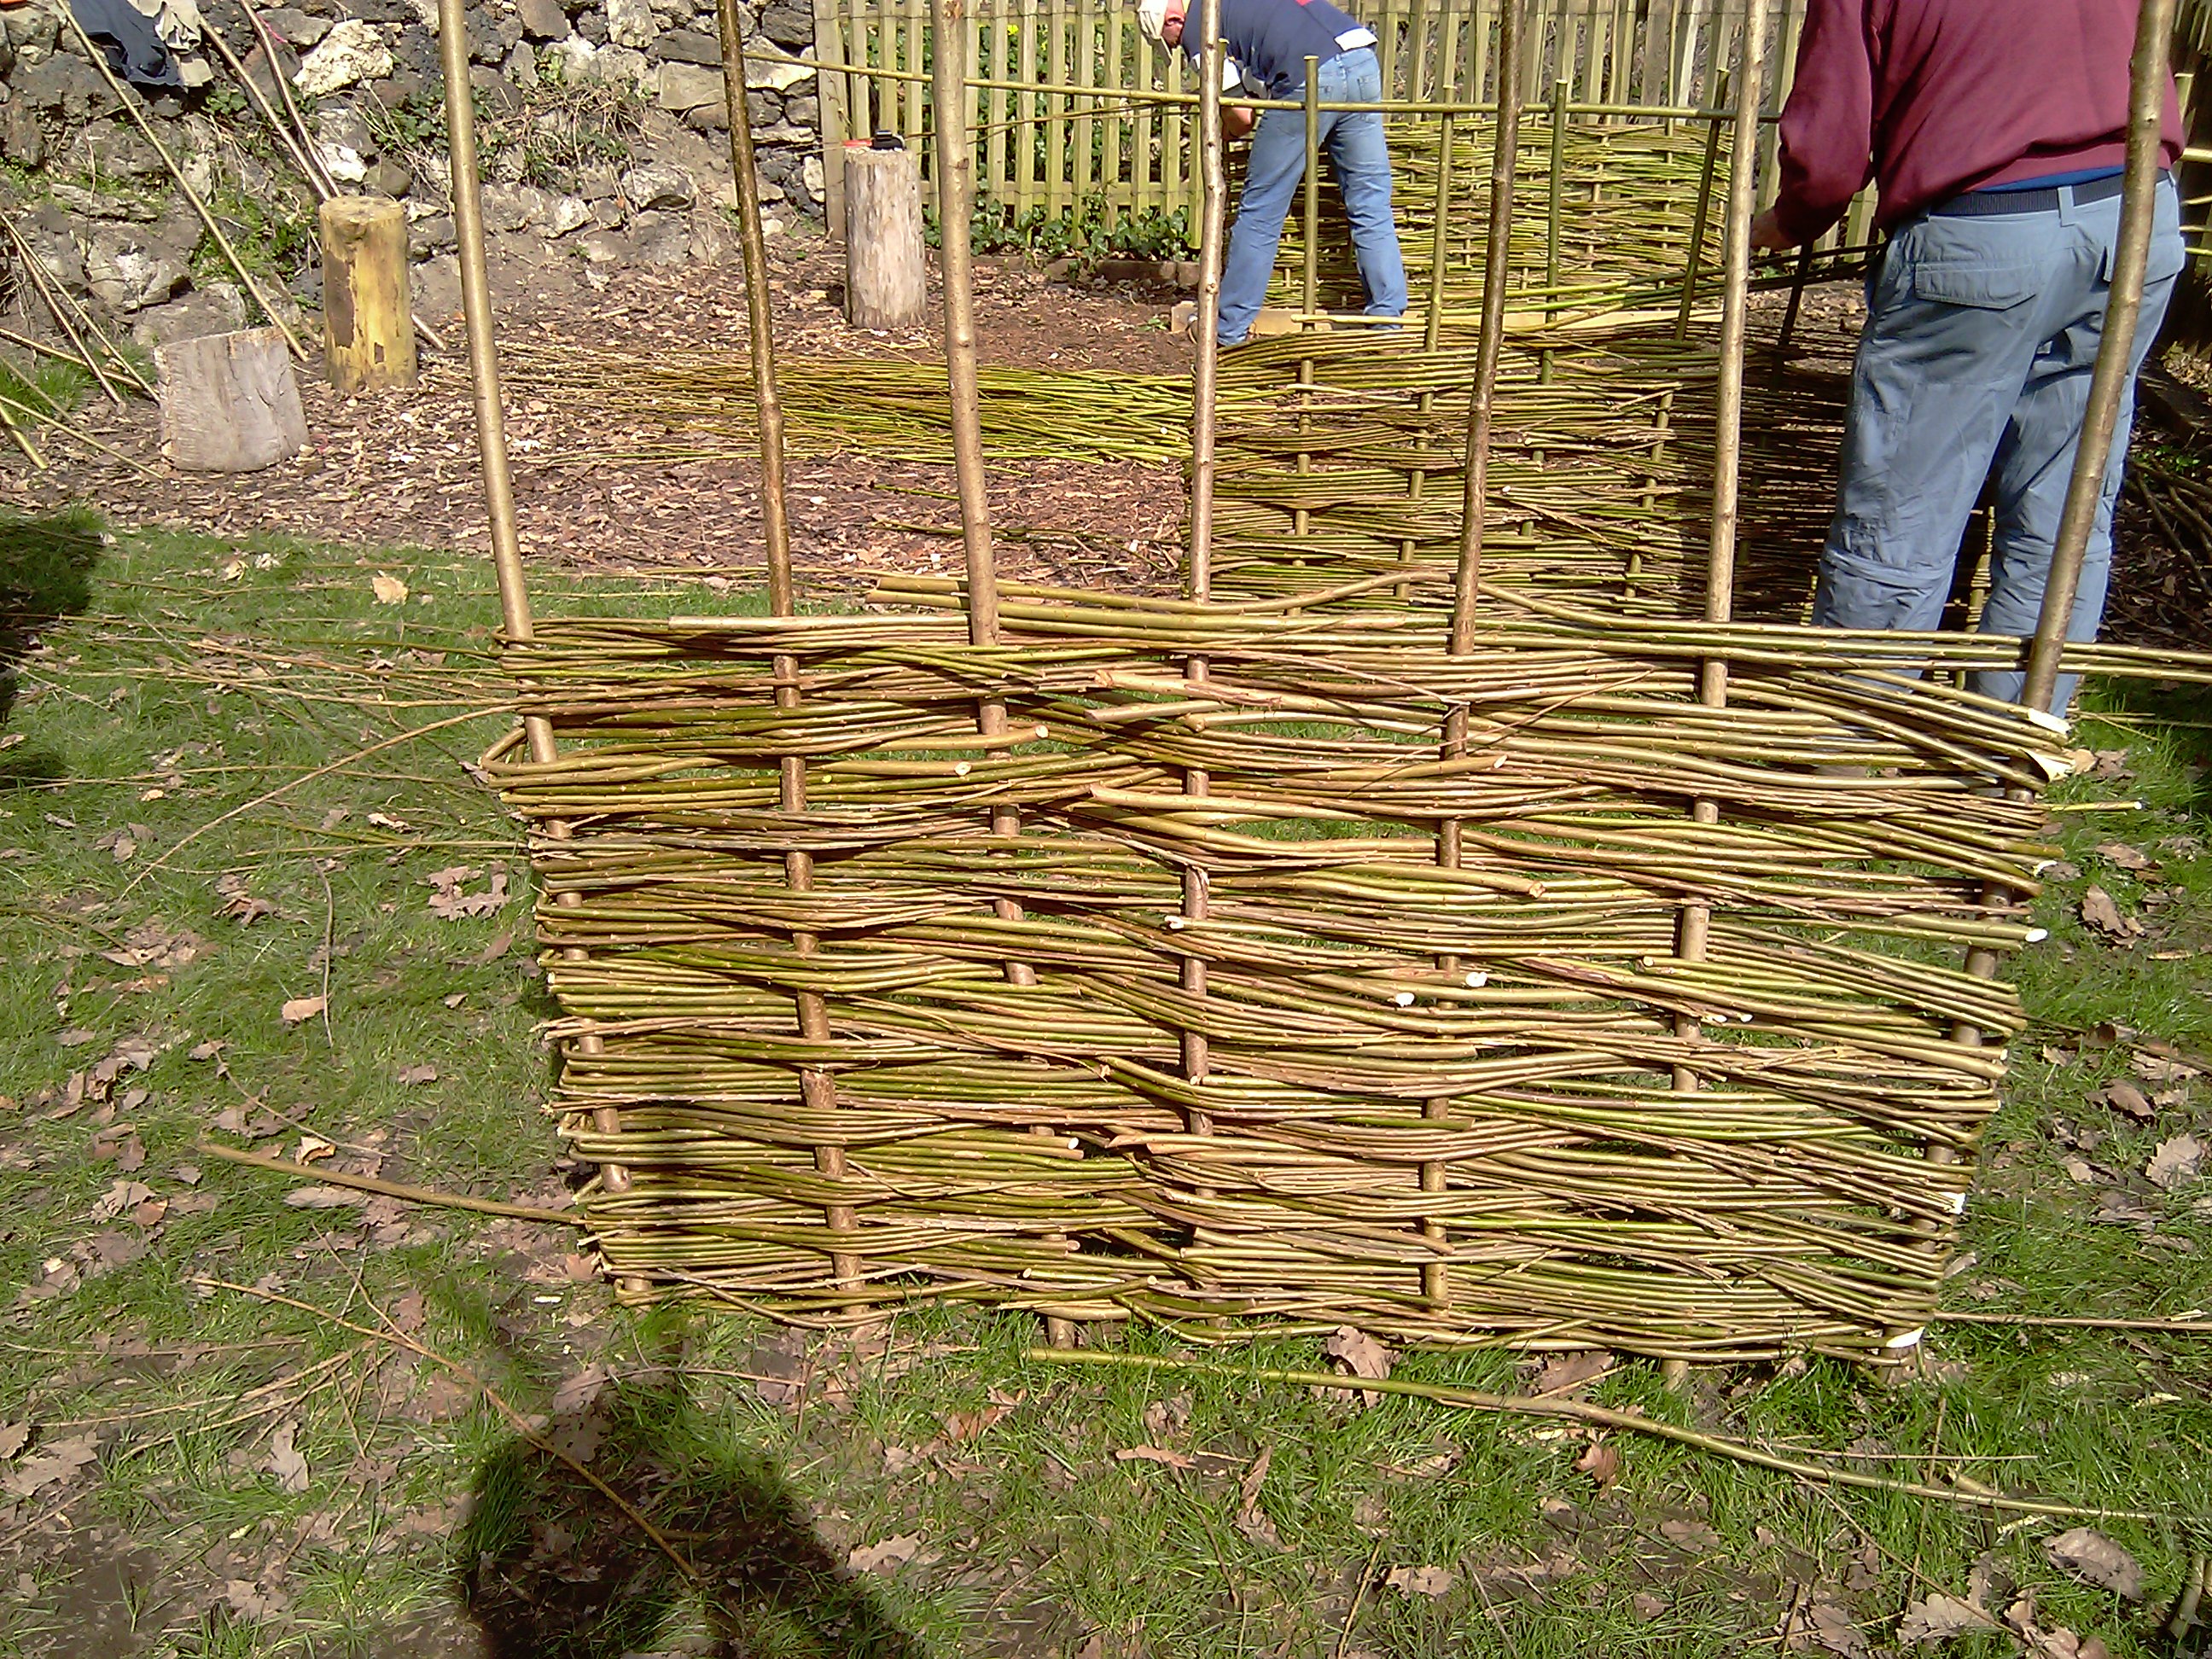 woven willow fence panels | browntroutfisherman's Blog